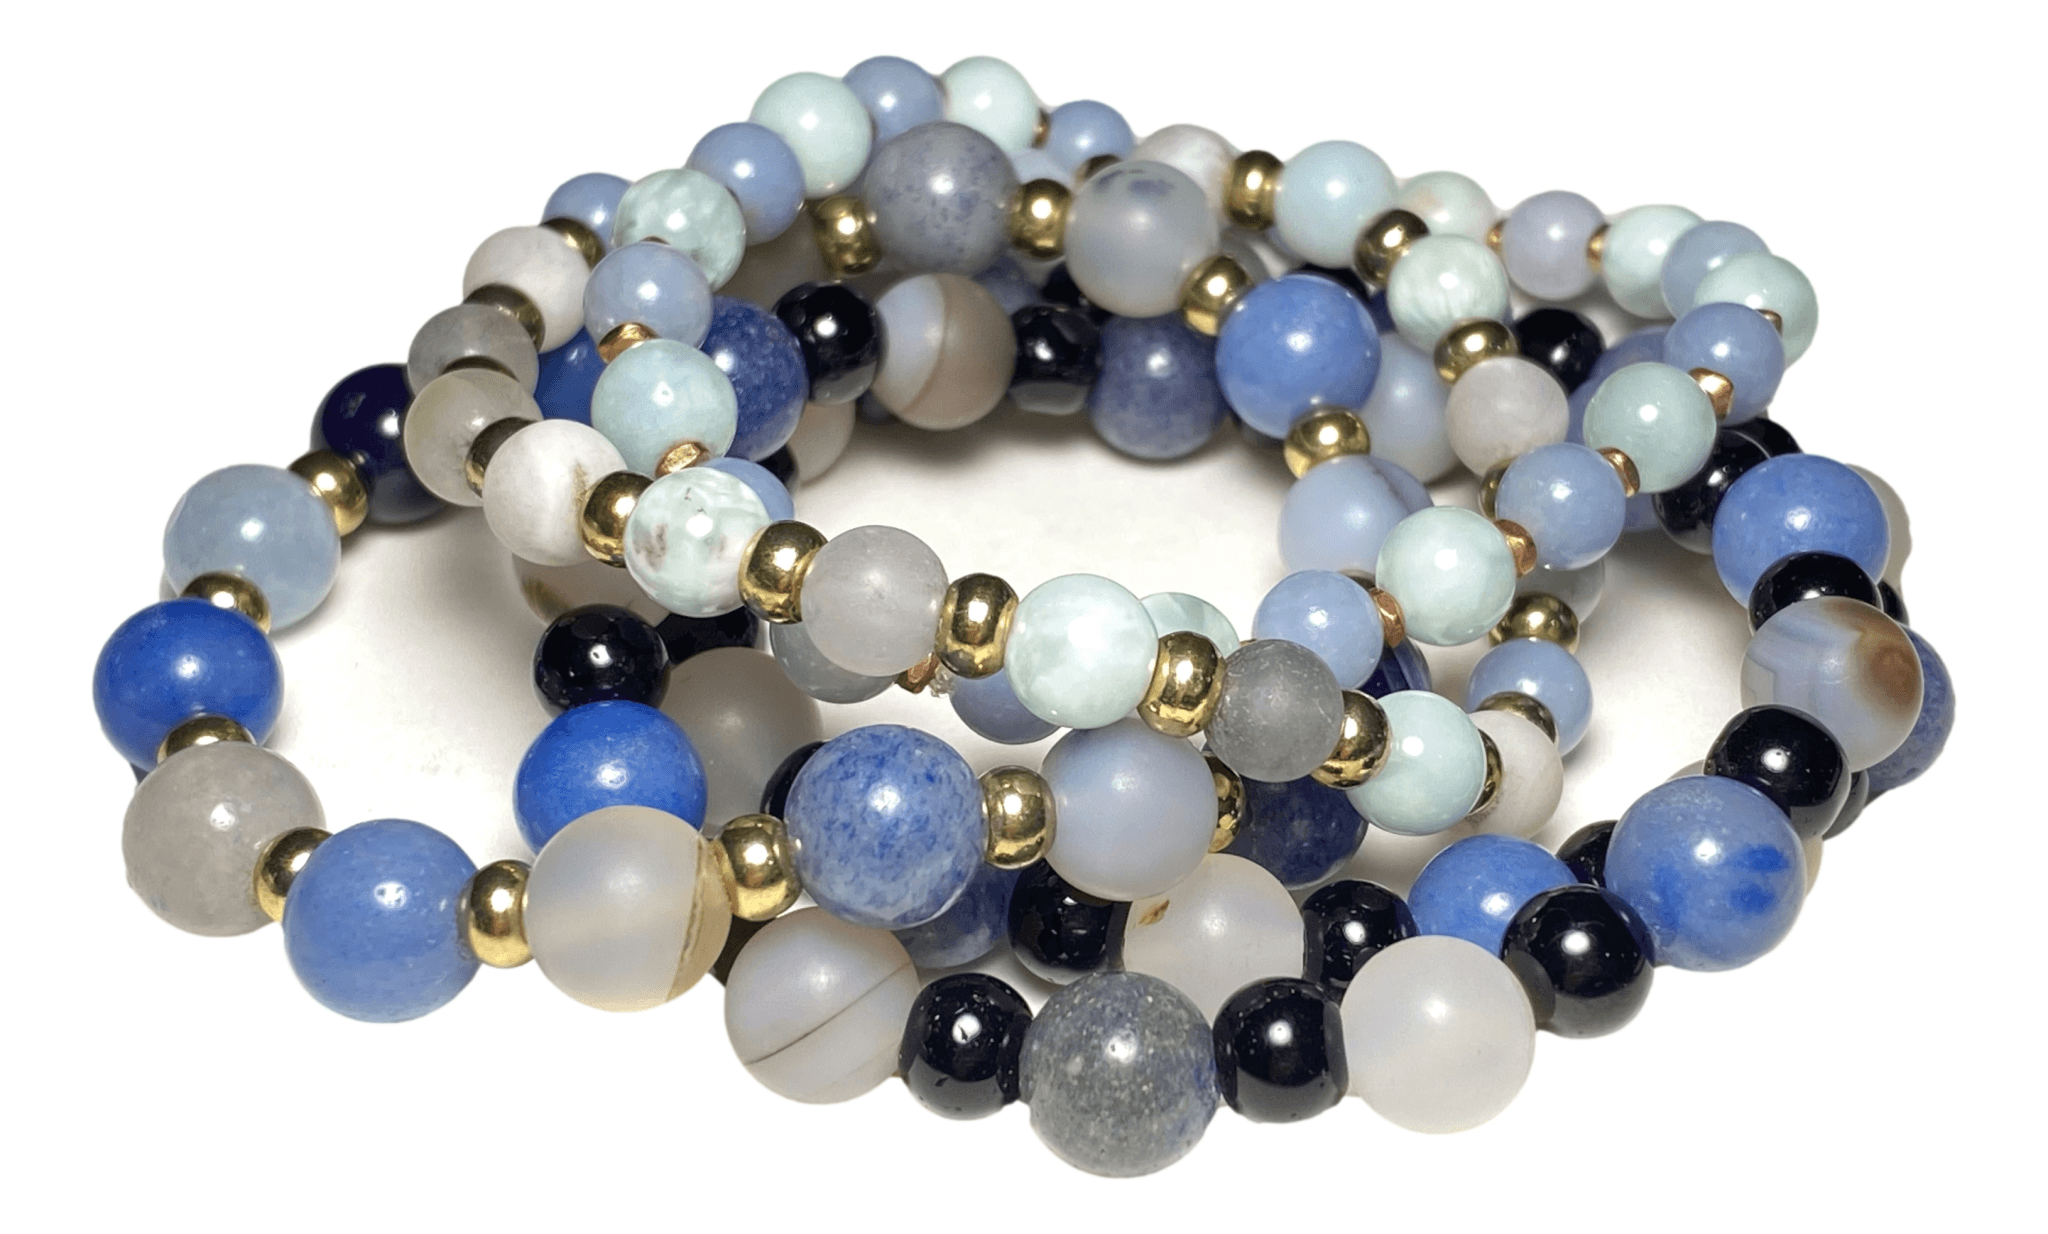 Bracelet Stretch Crystal Beads Assorted Blue Semi-precious Beadstyles Select a Saint Handmade by Skilled Artisan 2 1/2 W Inches - Ysleta Mission Gift Shop- VOTED El Paso's Best Gift Shop